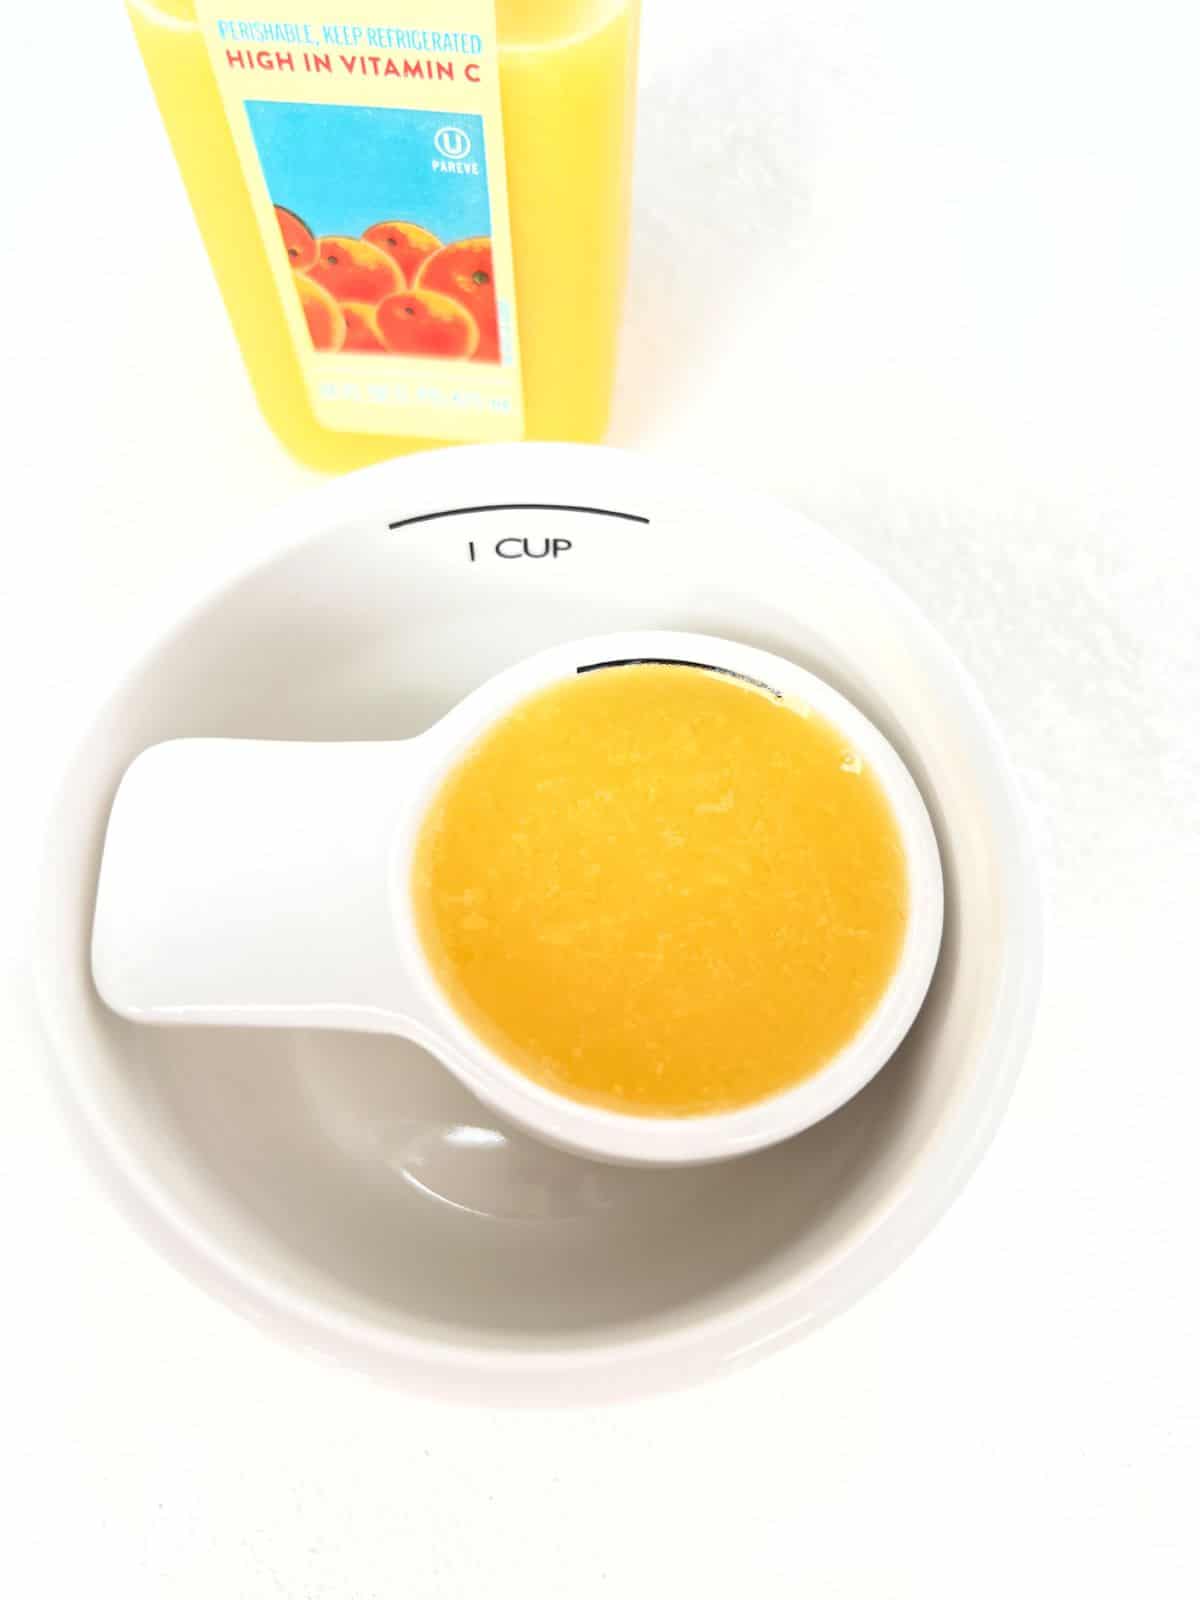 A quarter cup measuring cup filled with orange juice inside of a one cup measuring cup.